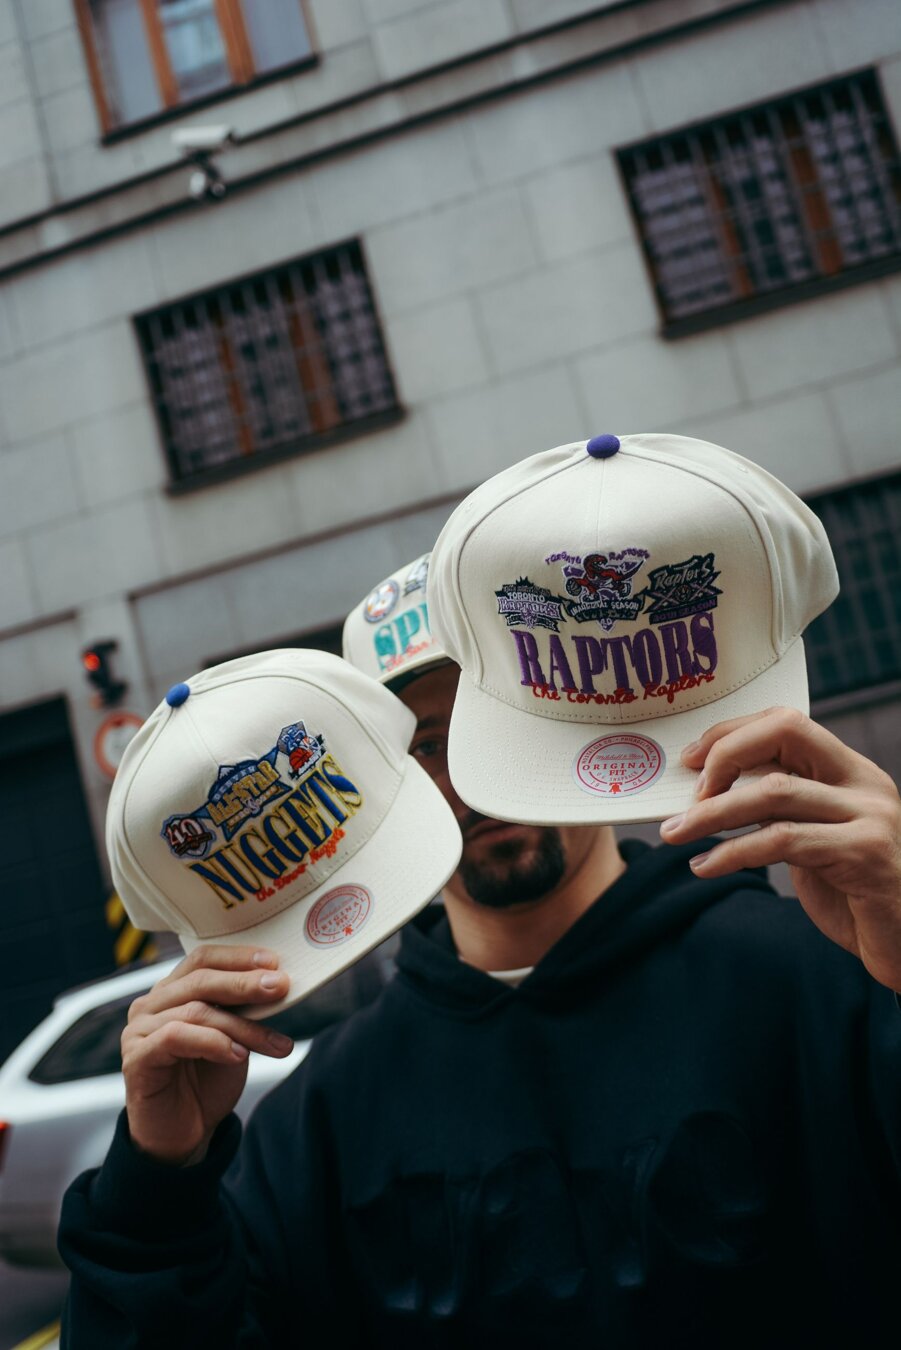 Vancouver Grizzlies Reframe Retro Off White Snapback - Mitchell